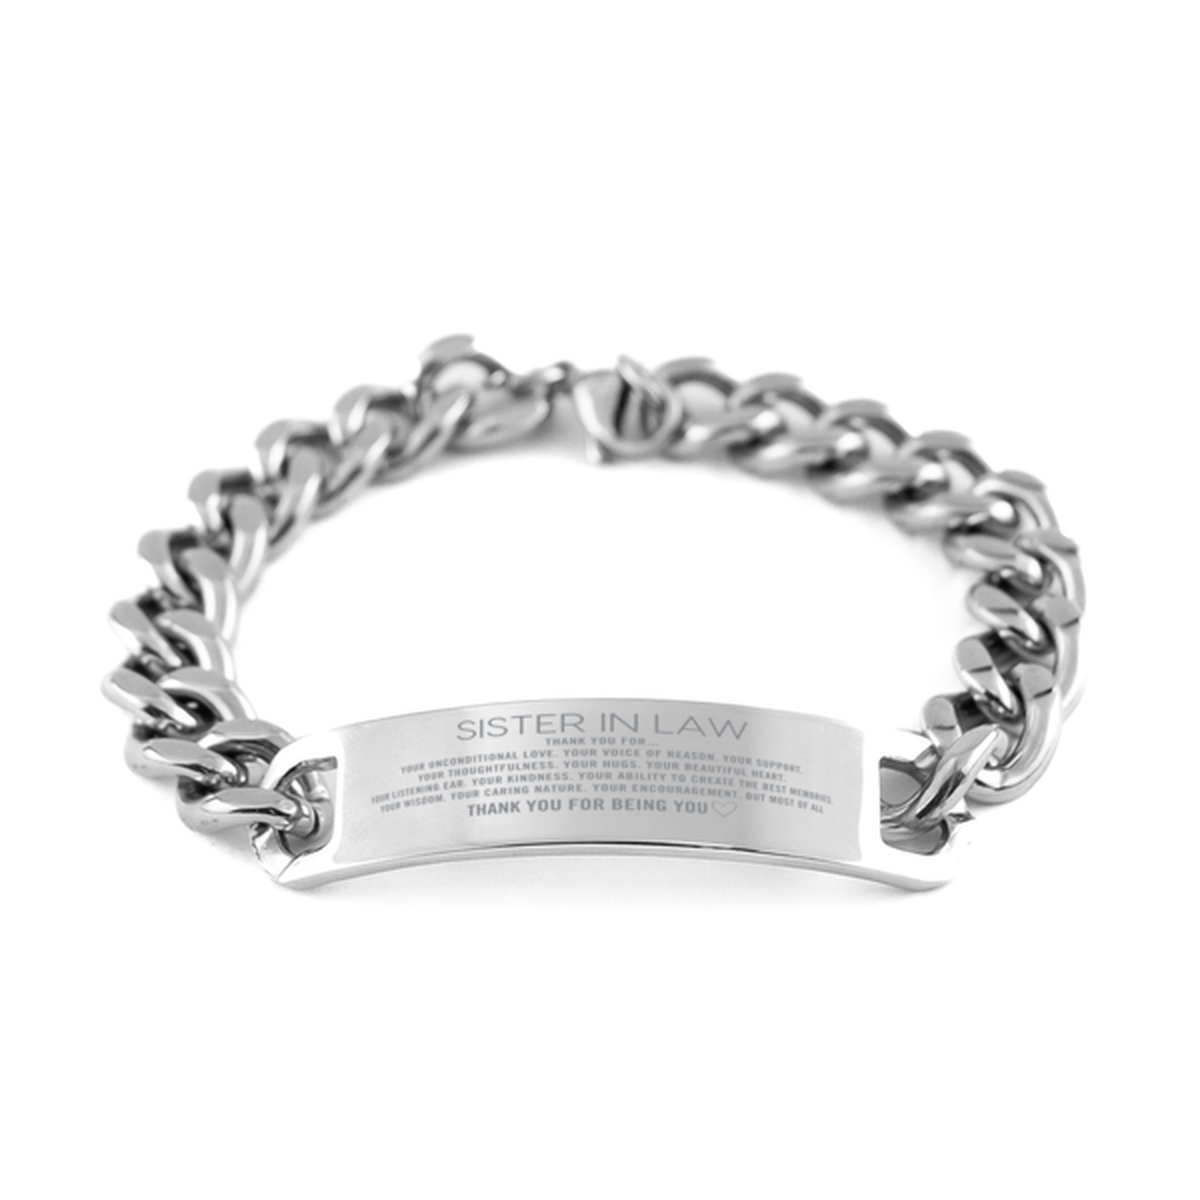 Sister In Law Cuban Chain Stainless Steel Bracelet Custom, Engraved Gifts For Sister In Law Christmas Graduation Birthday Gifts for Men Women Sister In Law Thank you for Your unconditional love